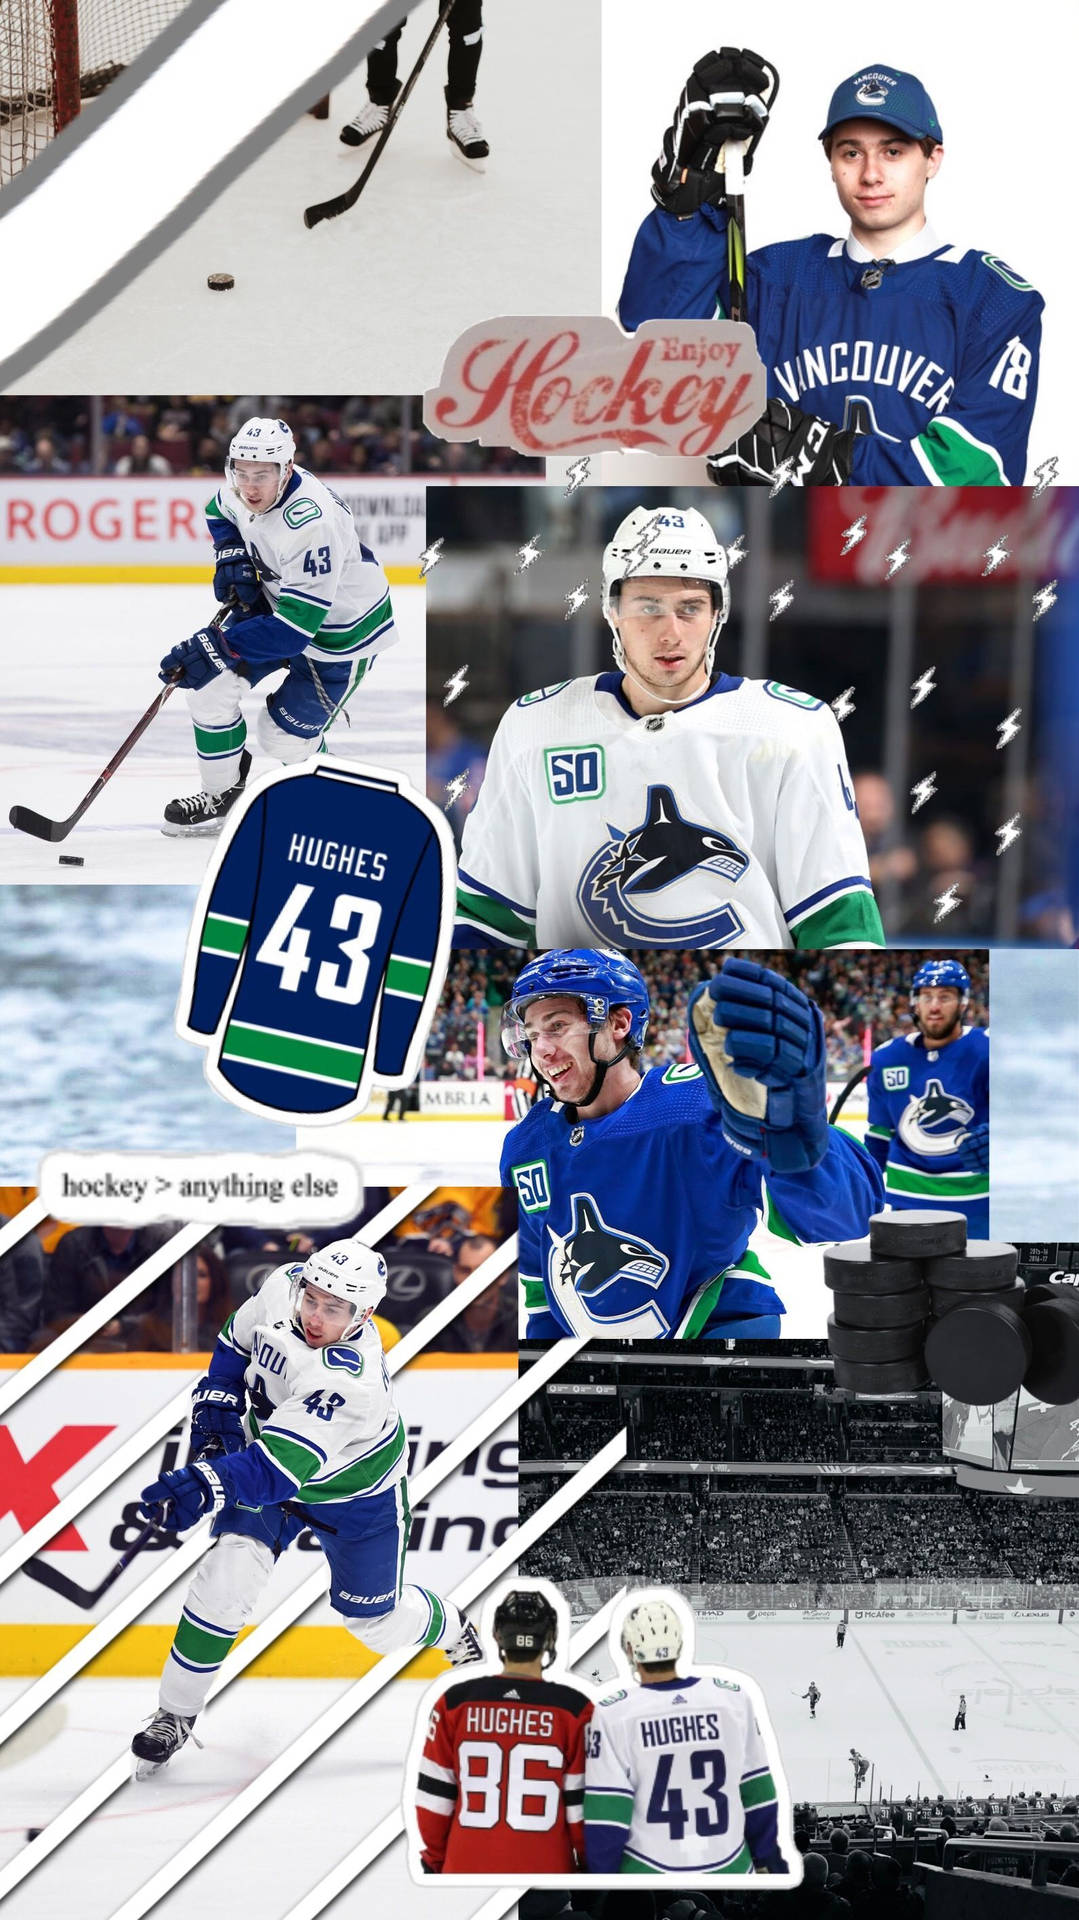 Download Canadian Nhl Player Elias Pettersson Retro Poster Wallpaper